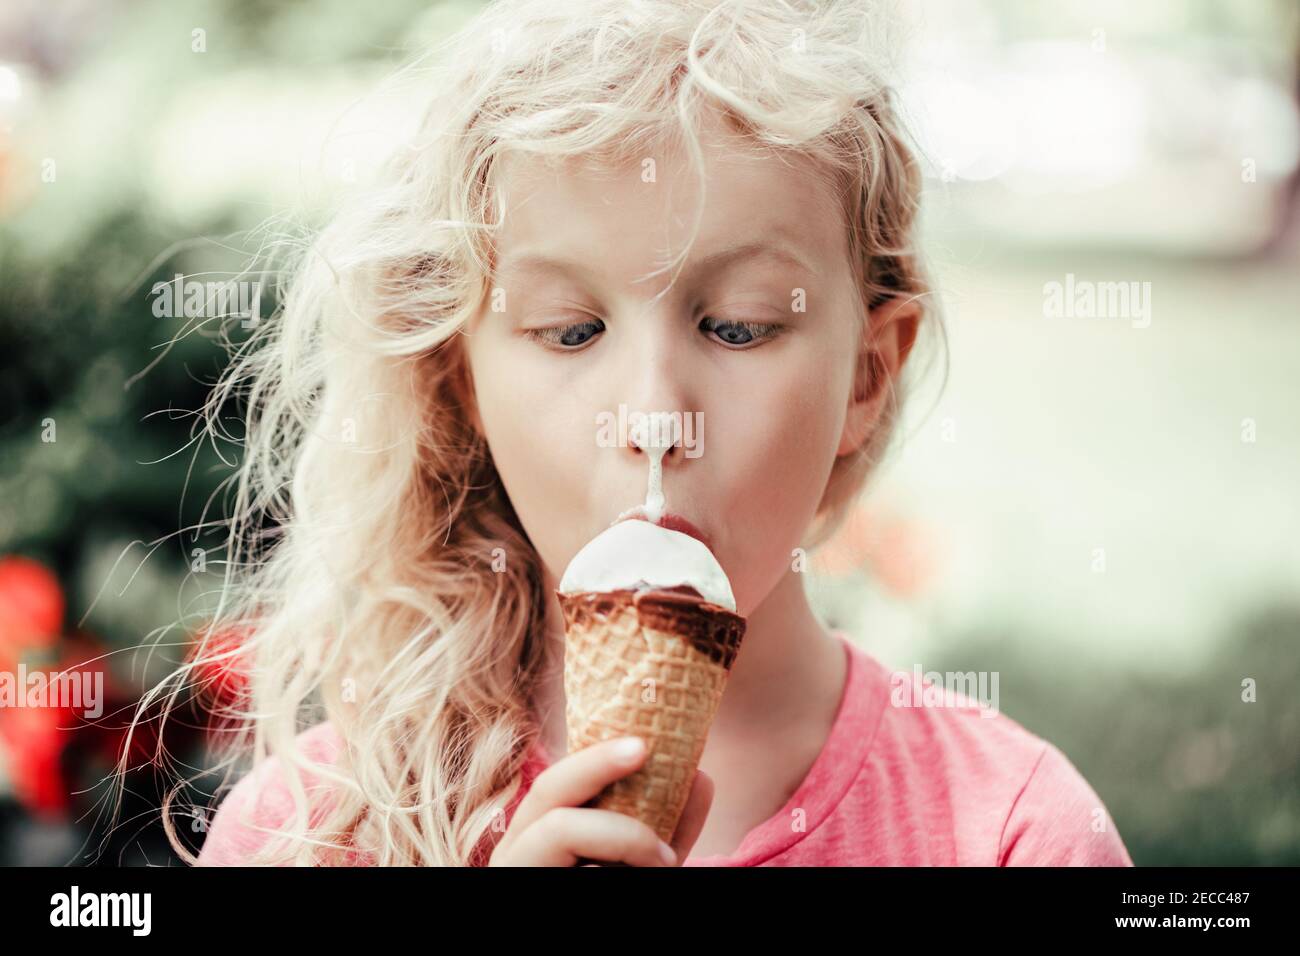 Cute funny adorable girl with dirty nose eating licking ice cream. Kid looking at food with crossed eyes. Hilarious child eating tasty sweet cold summ Stock Photo